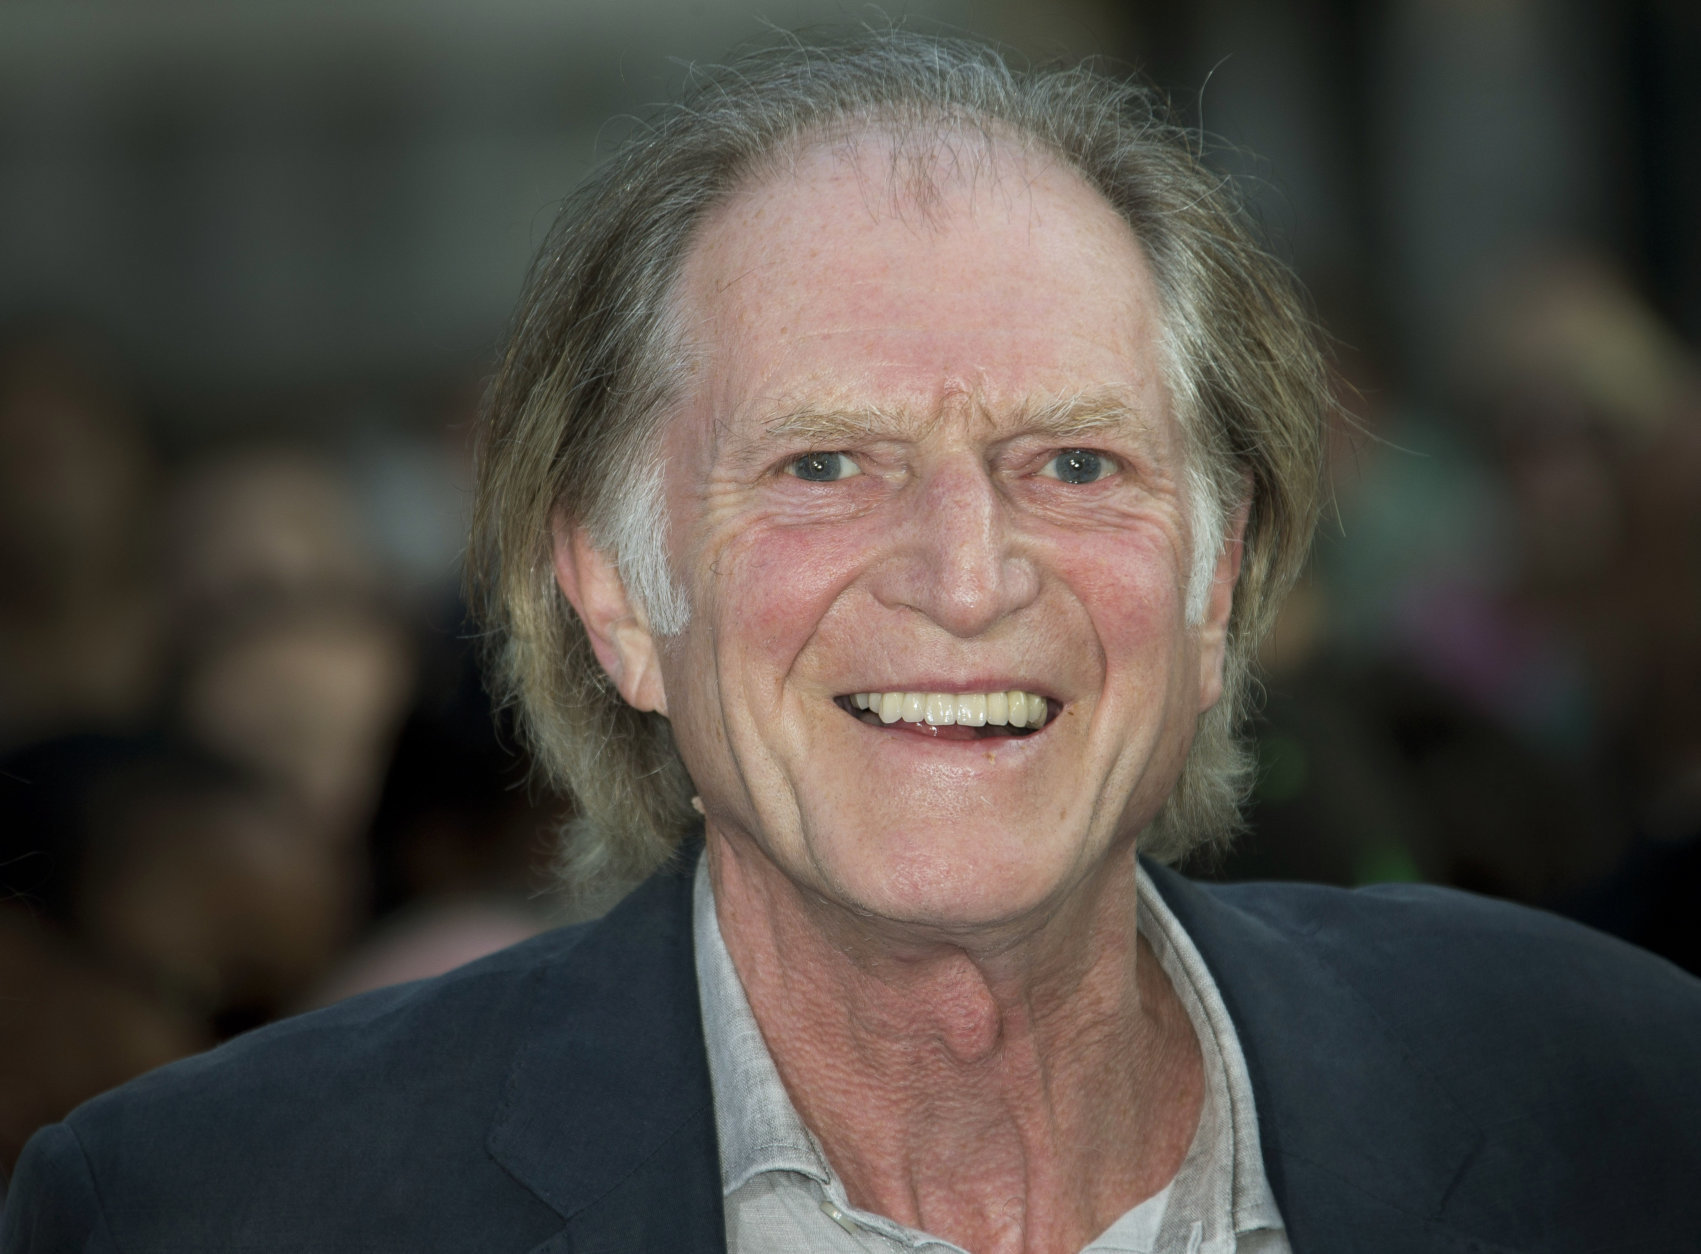 FILE - This July 10, 2013 file photo shows actor David Bradley at the World Premiere of Worlds End at a central London cinema in Leicester Square. From the hit British series Broadchurch to Game of Thrones to An Adventure in Space and Time about the creation of Dr Who, Bradley has had a busy year.  Bradley attended the BBC America TCA panel Thursday, July 25, to promote his role as, William Hartnell, the first actor to play Dr. Who, in a TV movie called An Adventure in Space and Time.  It will air in November coinciding with the 50th Anniversary of Dr Who.  (Photo by Joel Ryan/Invision/AP, File)